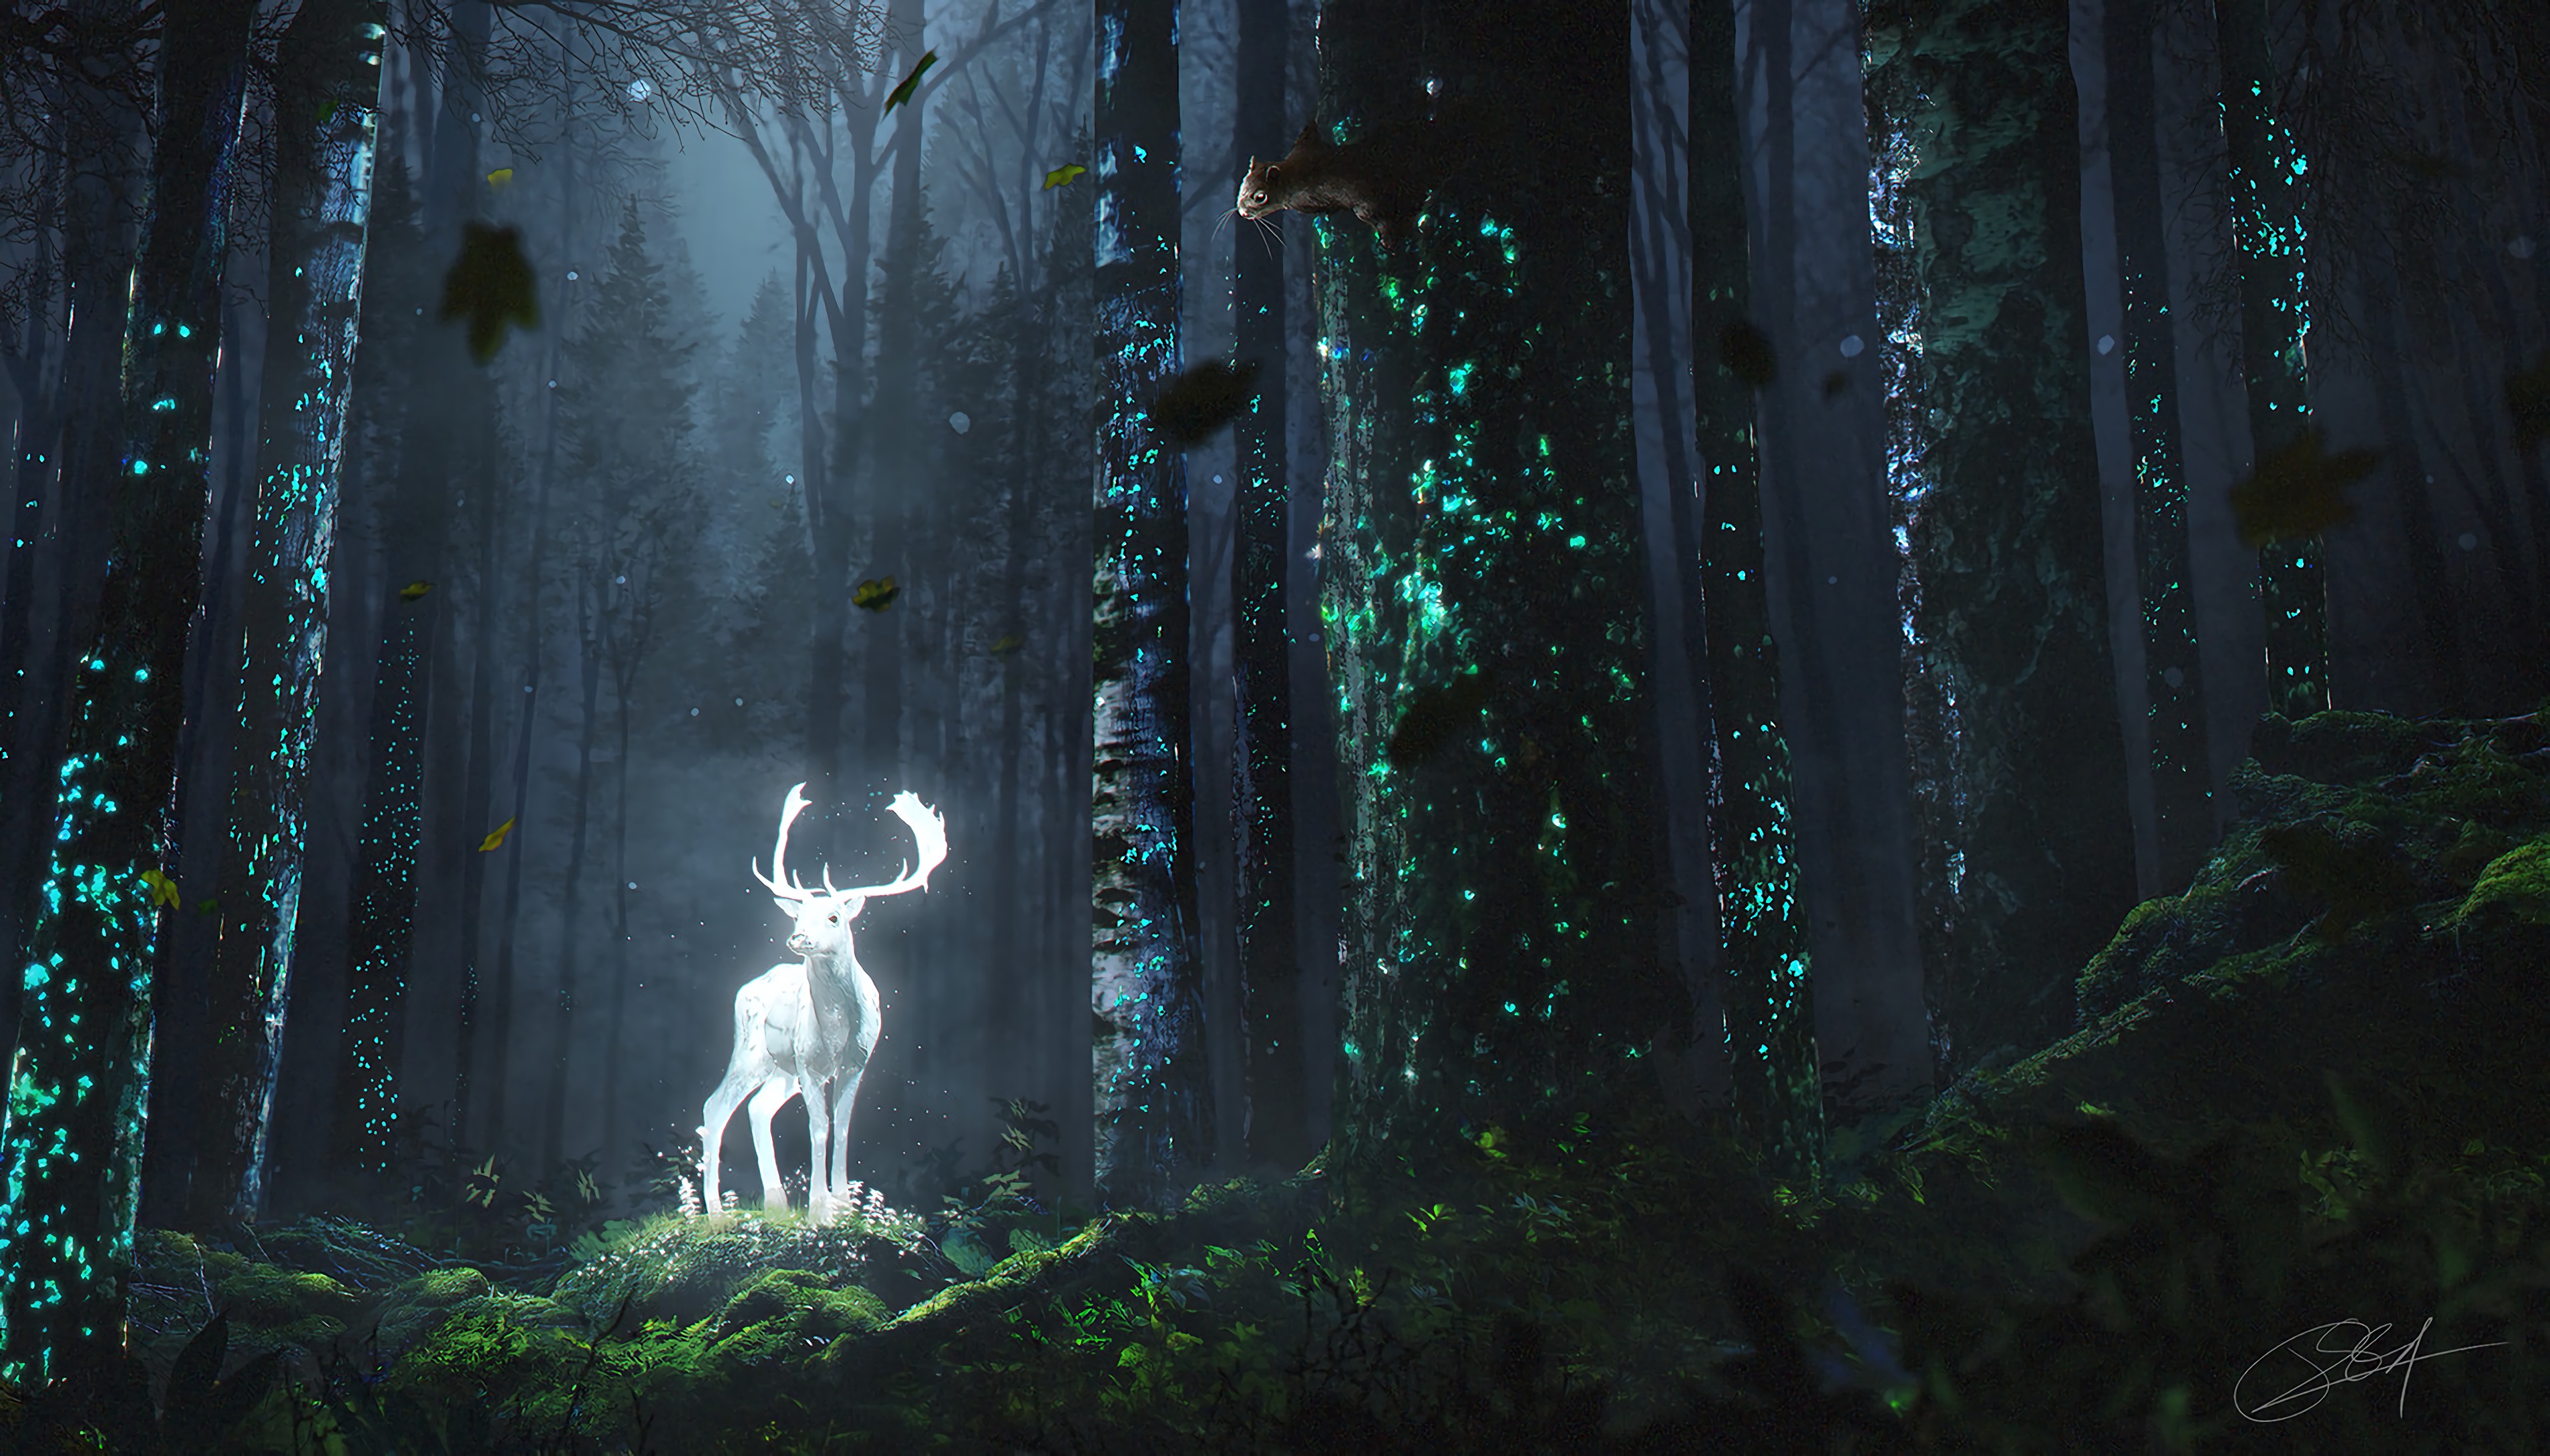 The fantasy forest of the glowing deer by Rocky Schouten